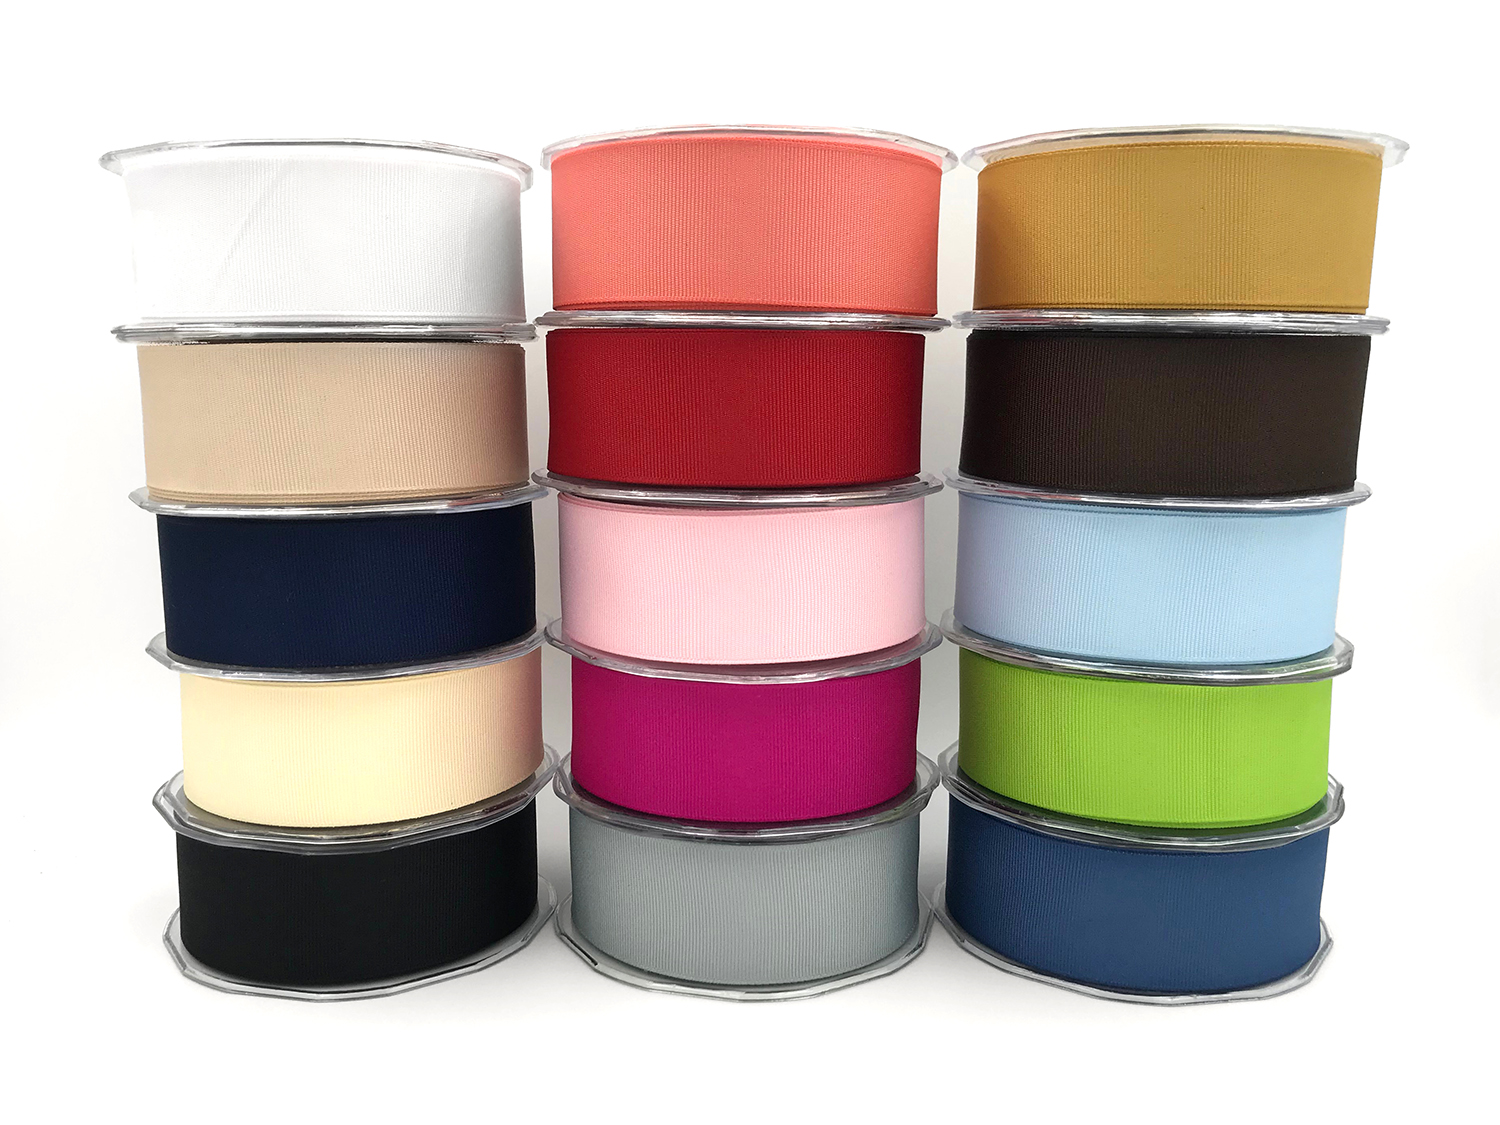 1.5 inch Full Color Grosgrain Ribbon, DESIGN YOUR OWN! 50yd roll